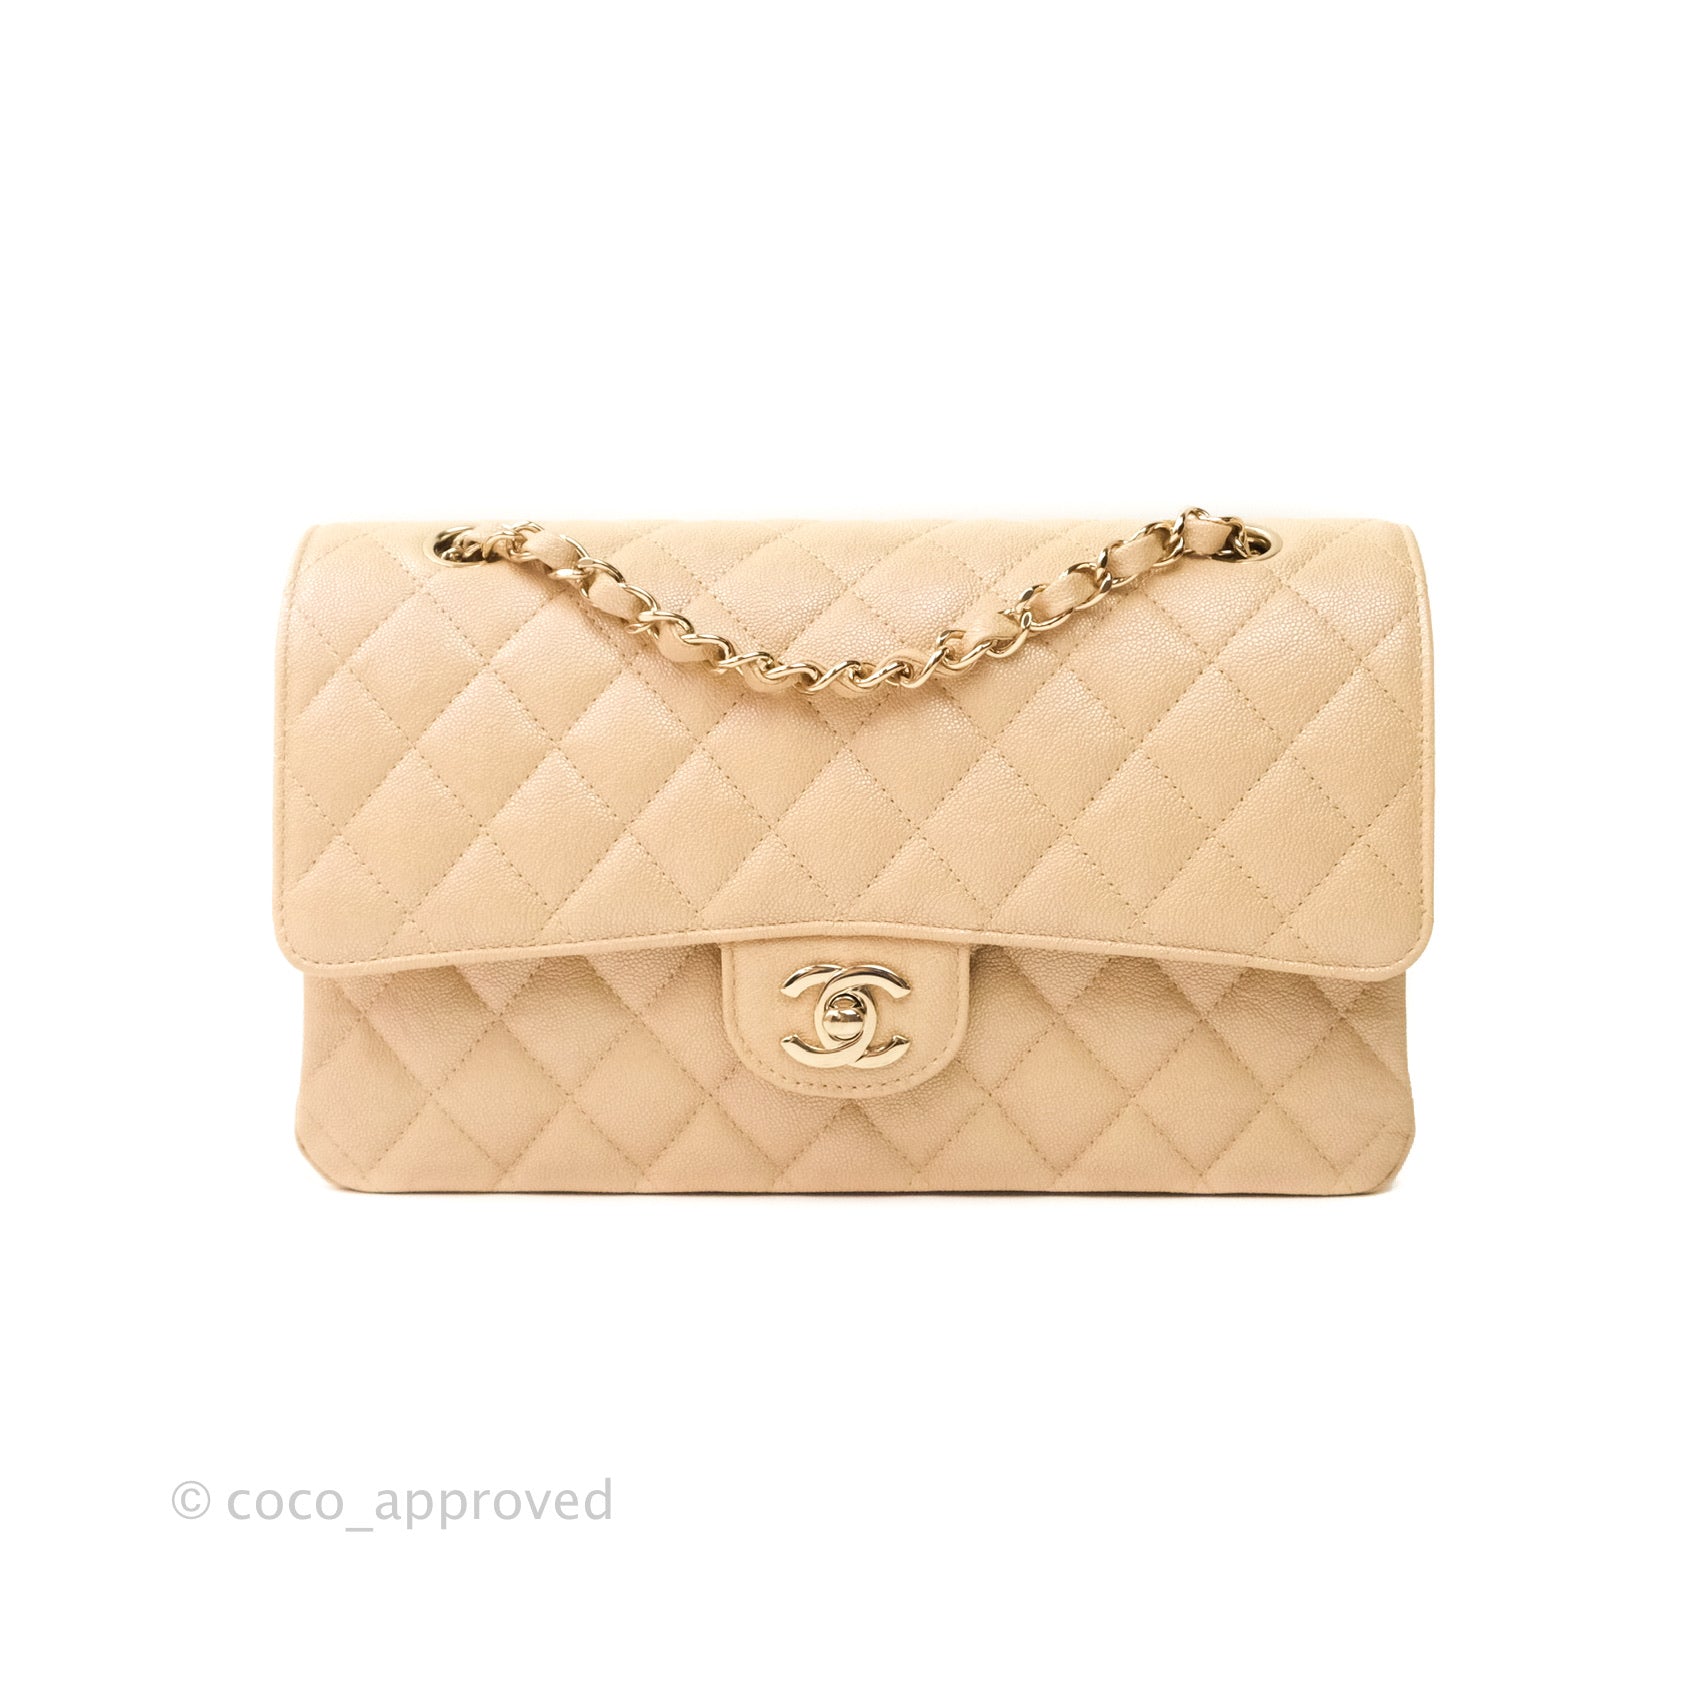 $2800 Chanel Classic Iridescent Pearl Beige Nude Quilted Caviar Timeless Clutch  Bag Purse GHW - Lust4Labels